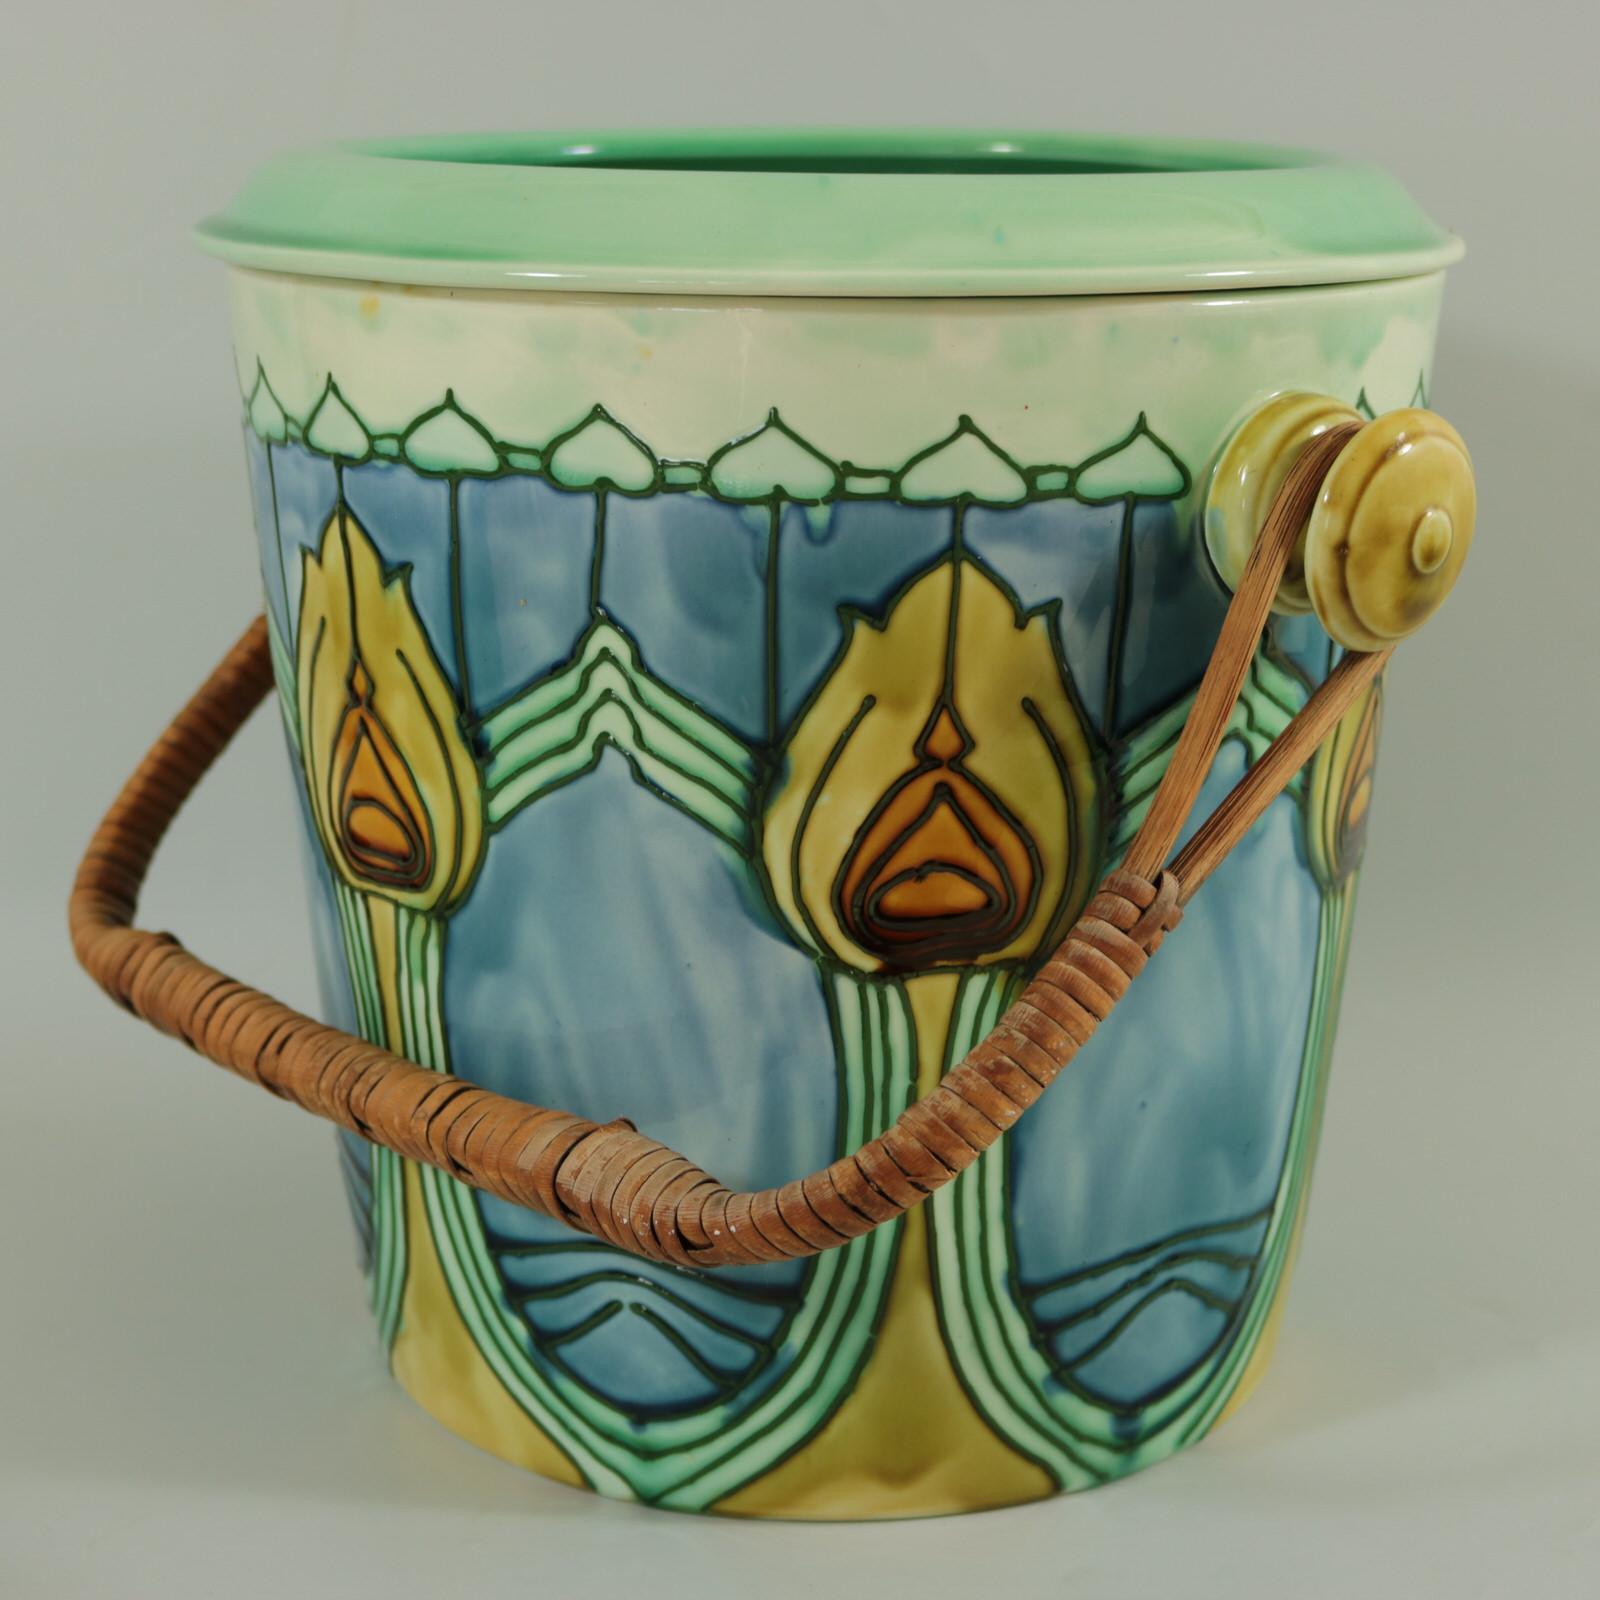 Minton Secessionist Bucket or Pail with a Drainer insert. Decorated with Art Nouveau style geometric and floral motifs. Blue, green and yellow glazes. Original bamboo handle. Removable drainer. Maker's marks including printed 'MINTONS LTD. NO. 36'